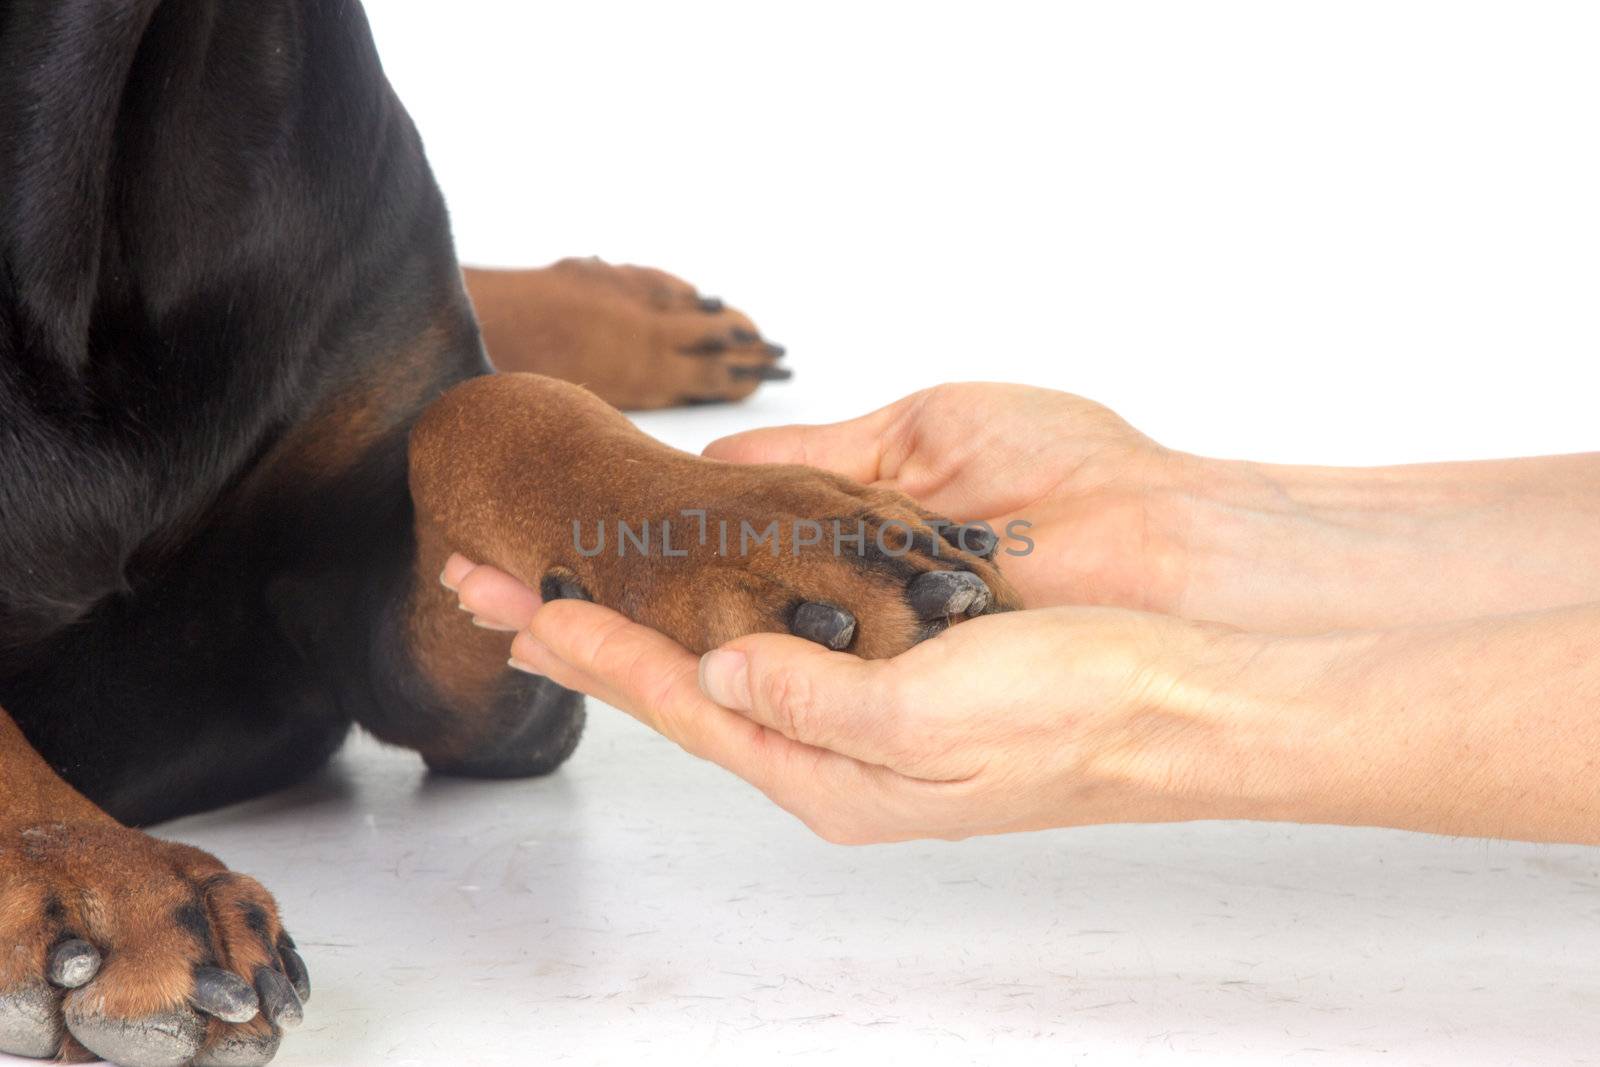 Friendship between human and animal - puppy give woman paw - han by gsdonlin